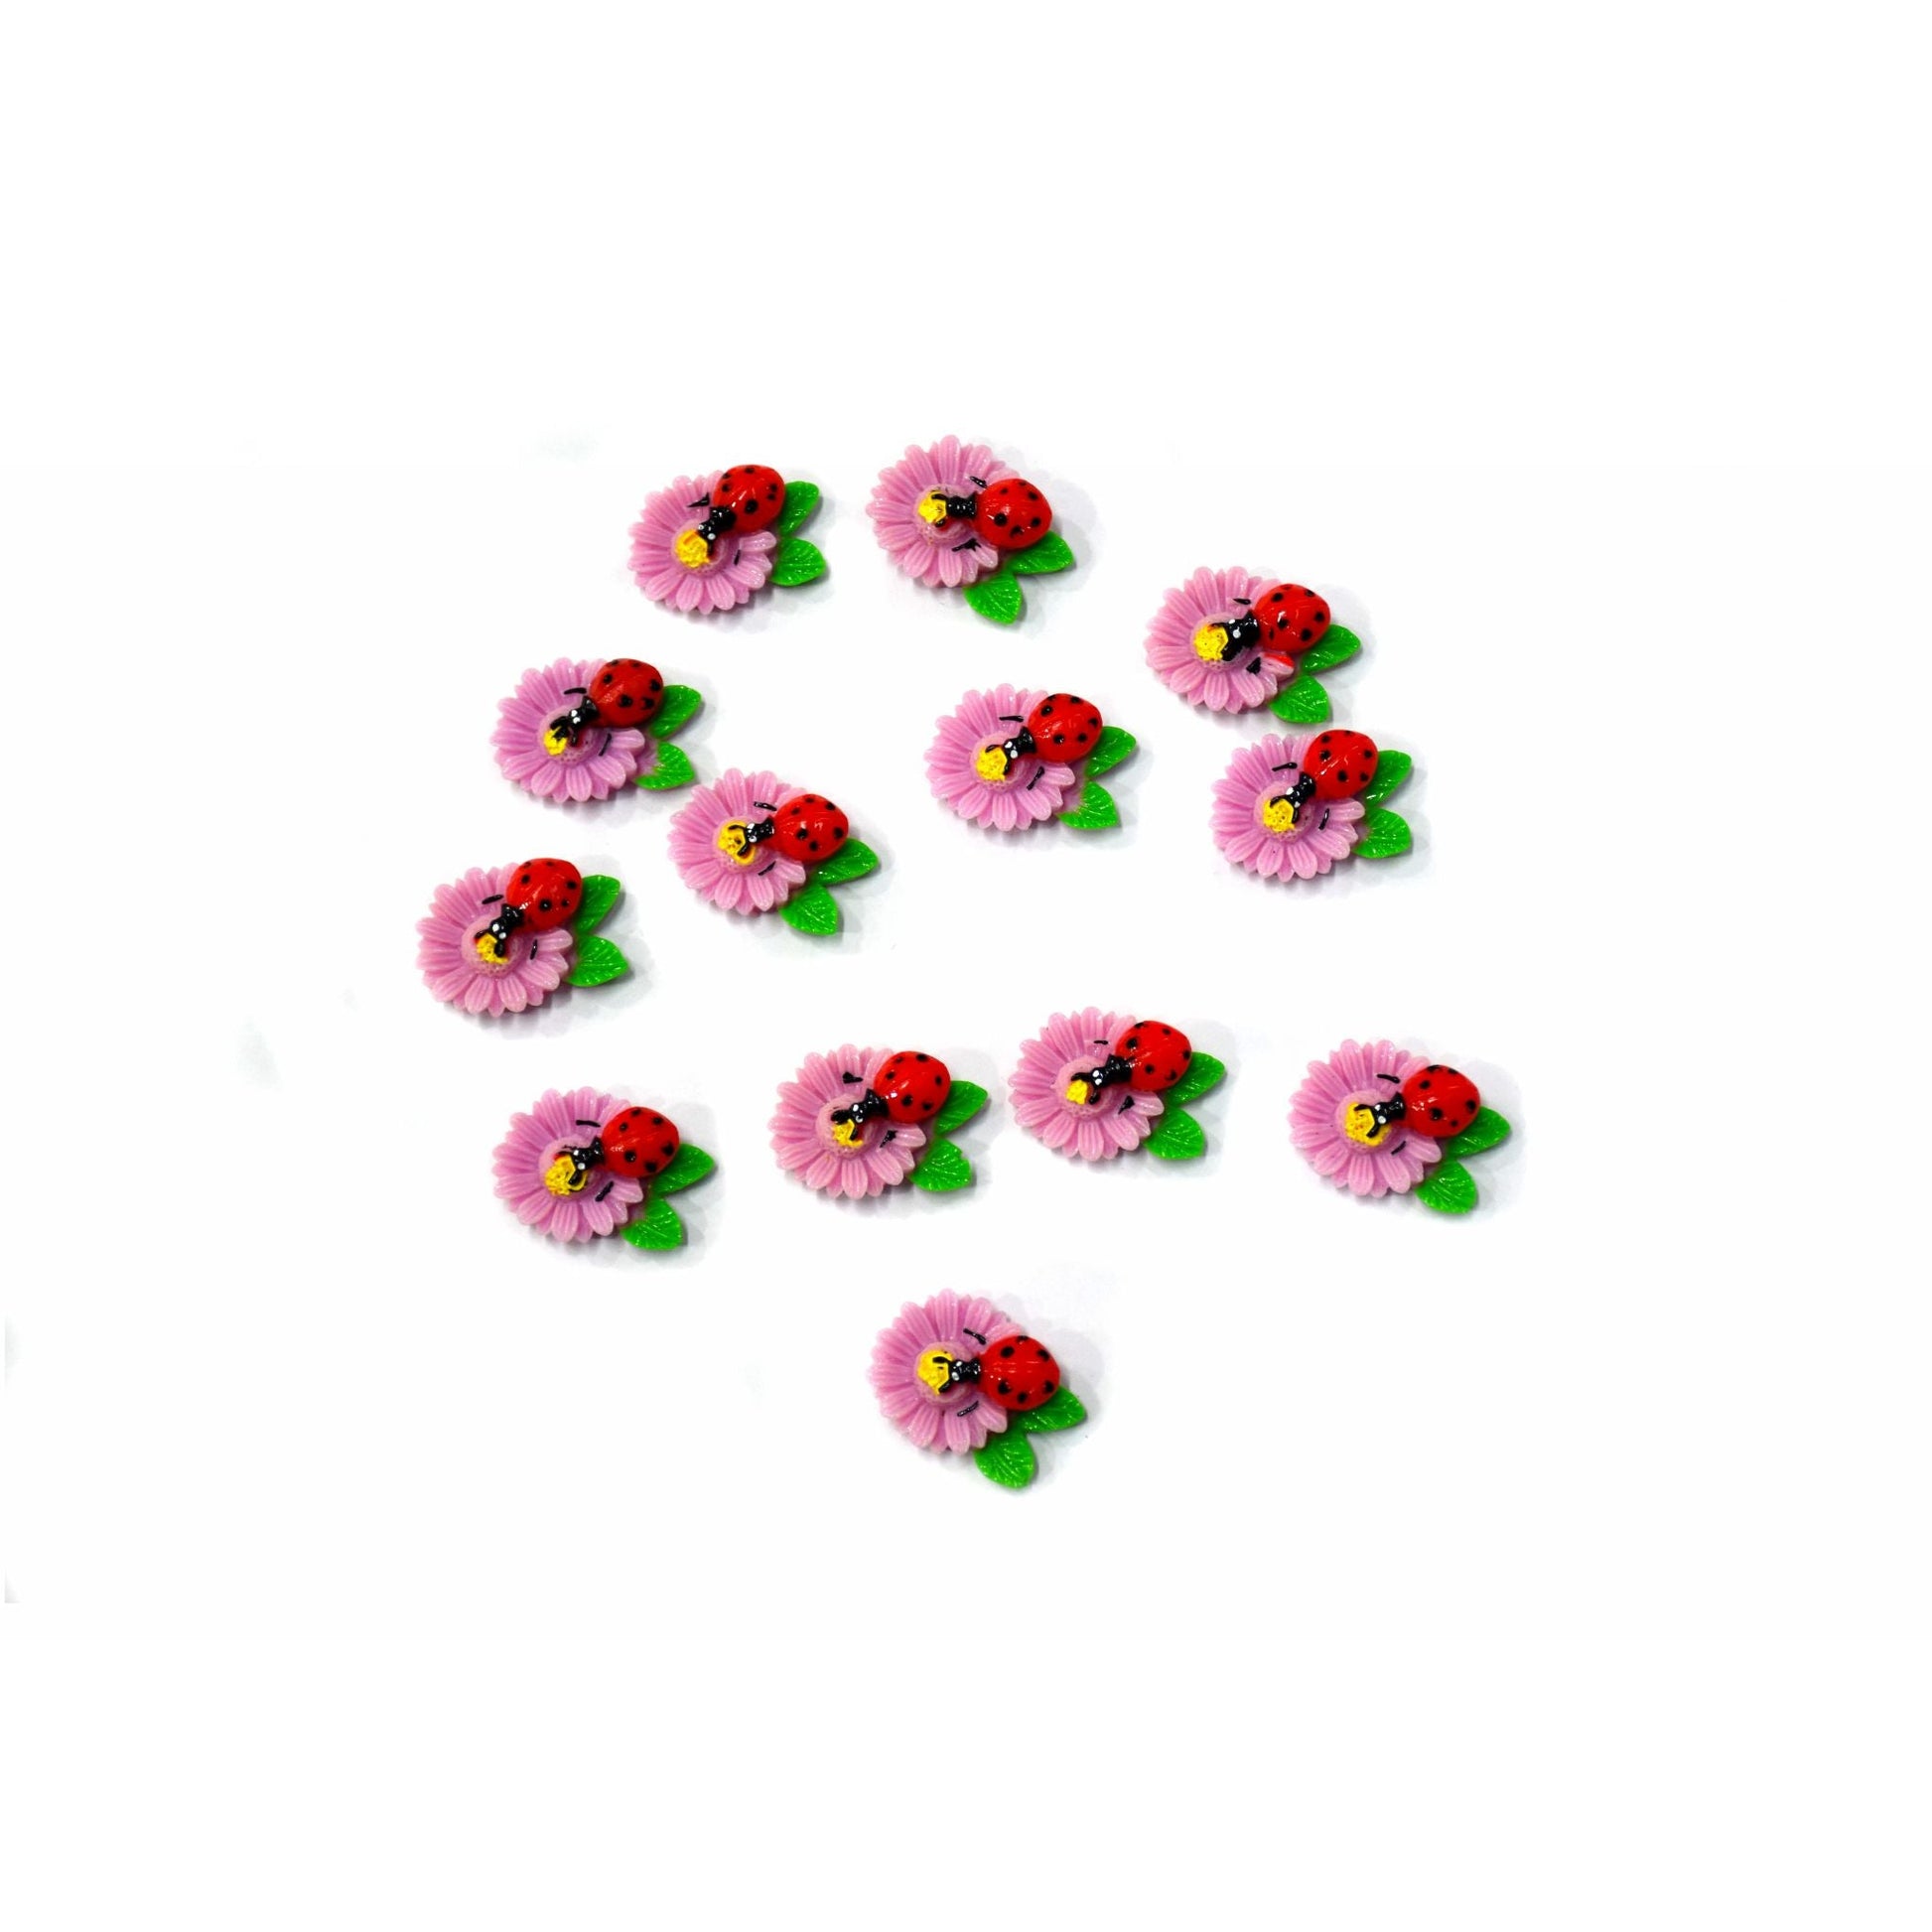 Indian Petals Flat-back Resin Flower with a Beetle Cabochons Motif for Craft Decoration or Rakhi - 12448, Purple